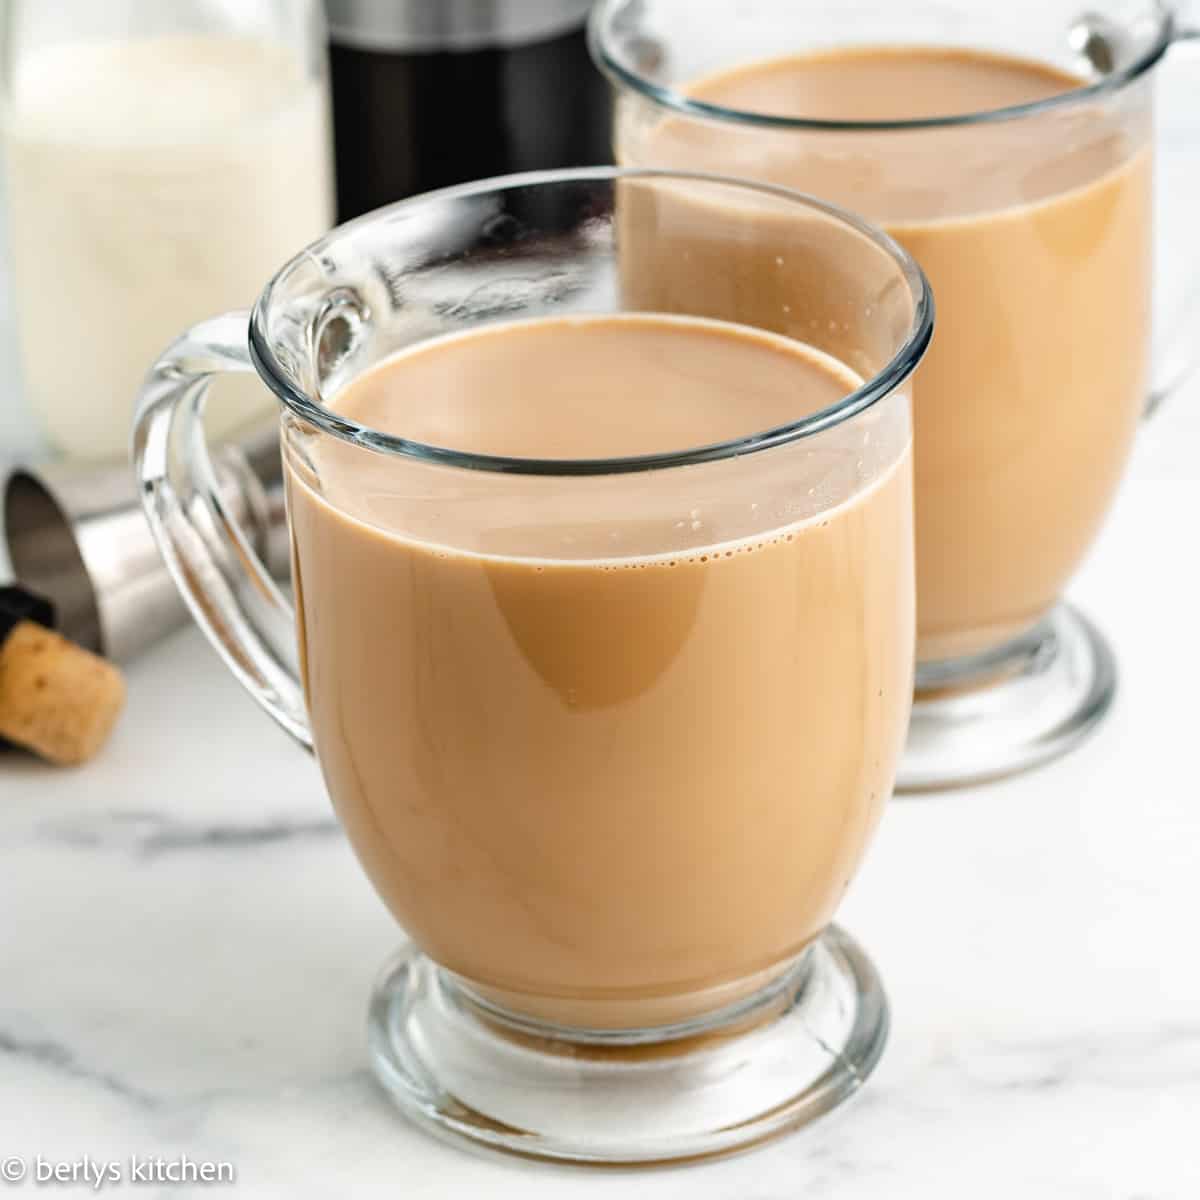 Coffee with kahlua featured image thanksgiving recipes you don't want to miss